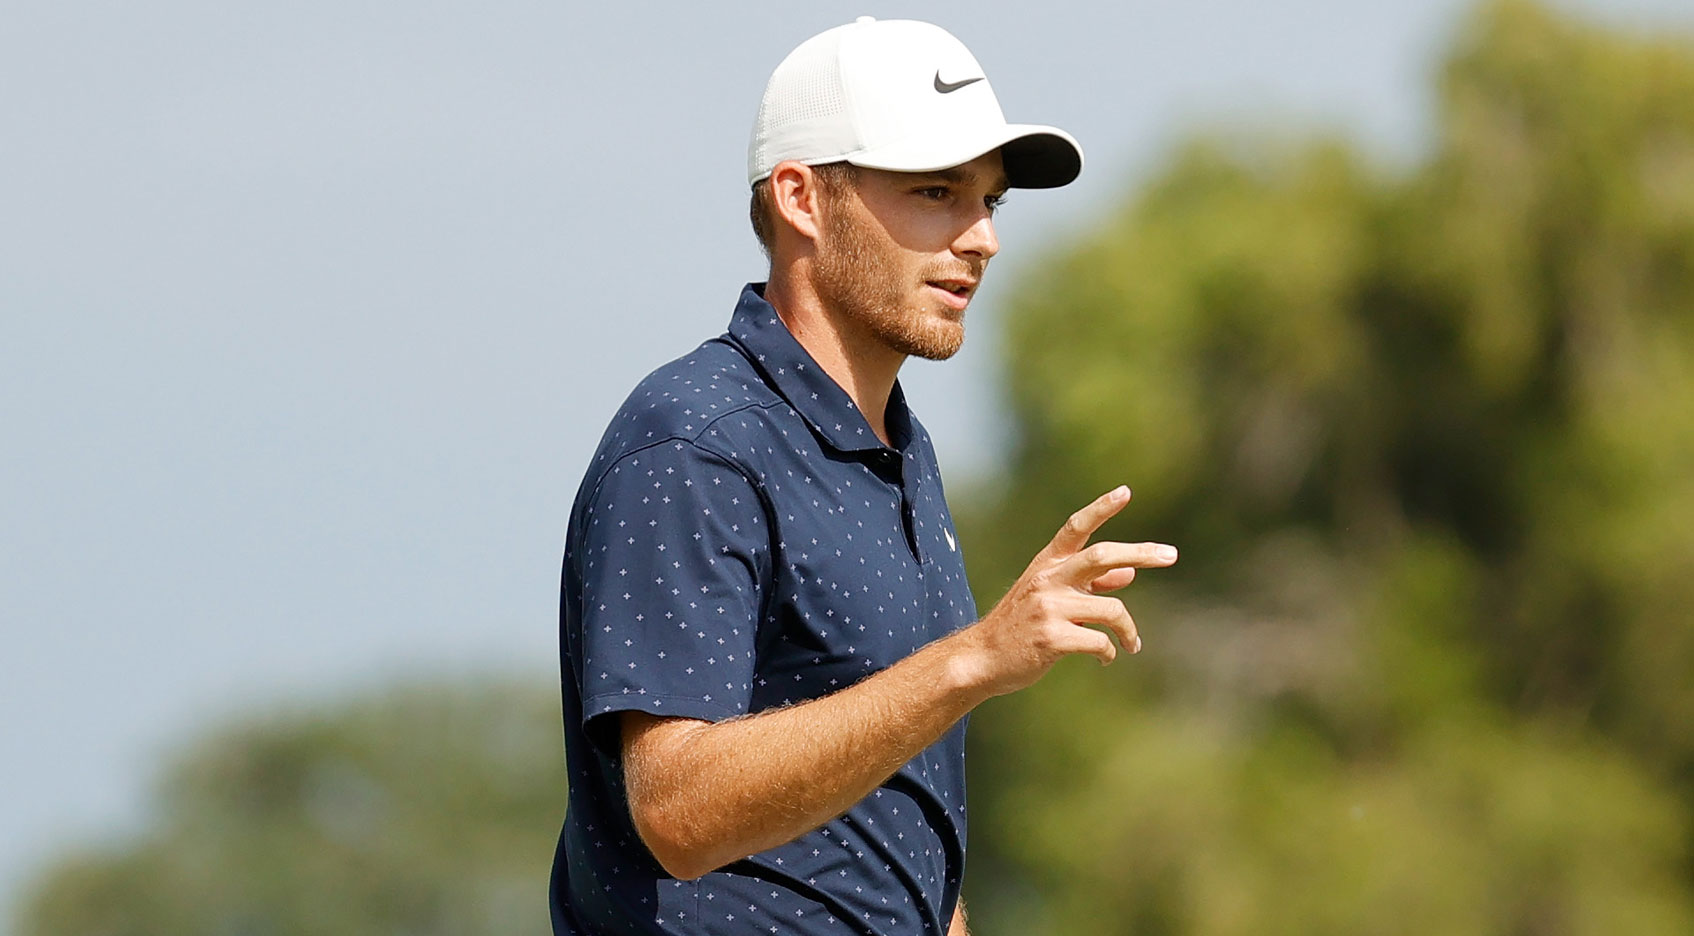 Aaron Wise takes three-shot lead at The Honda Classic